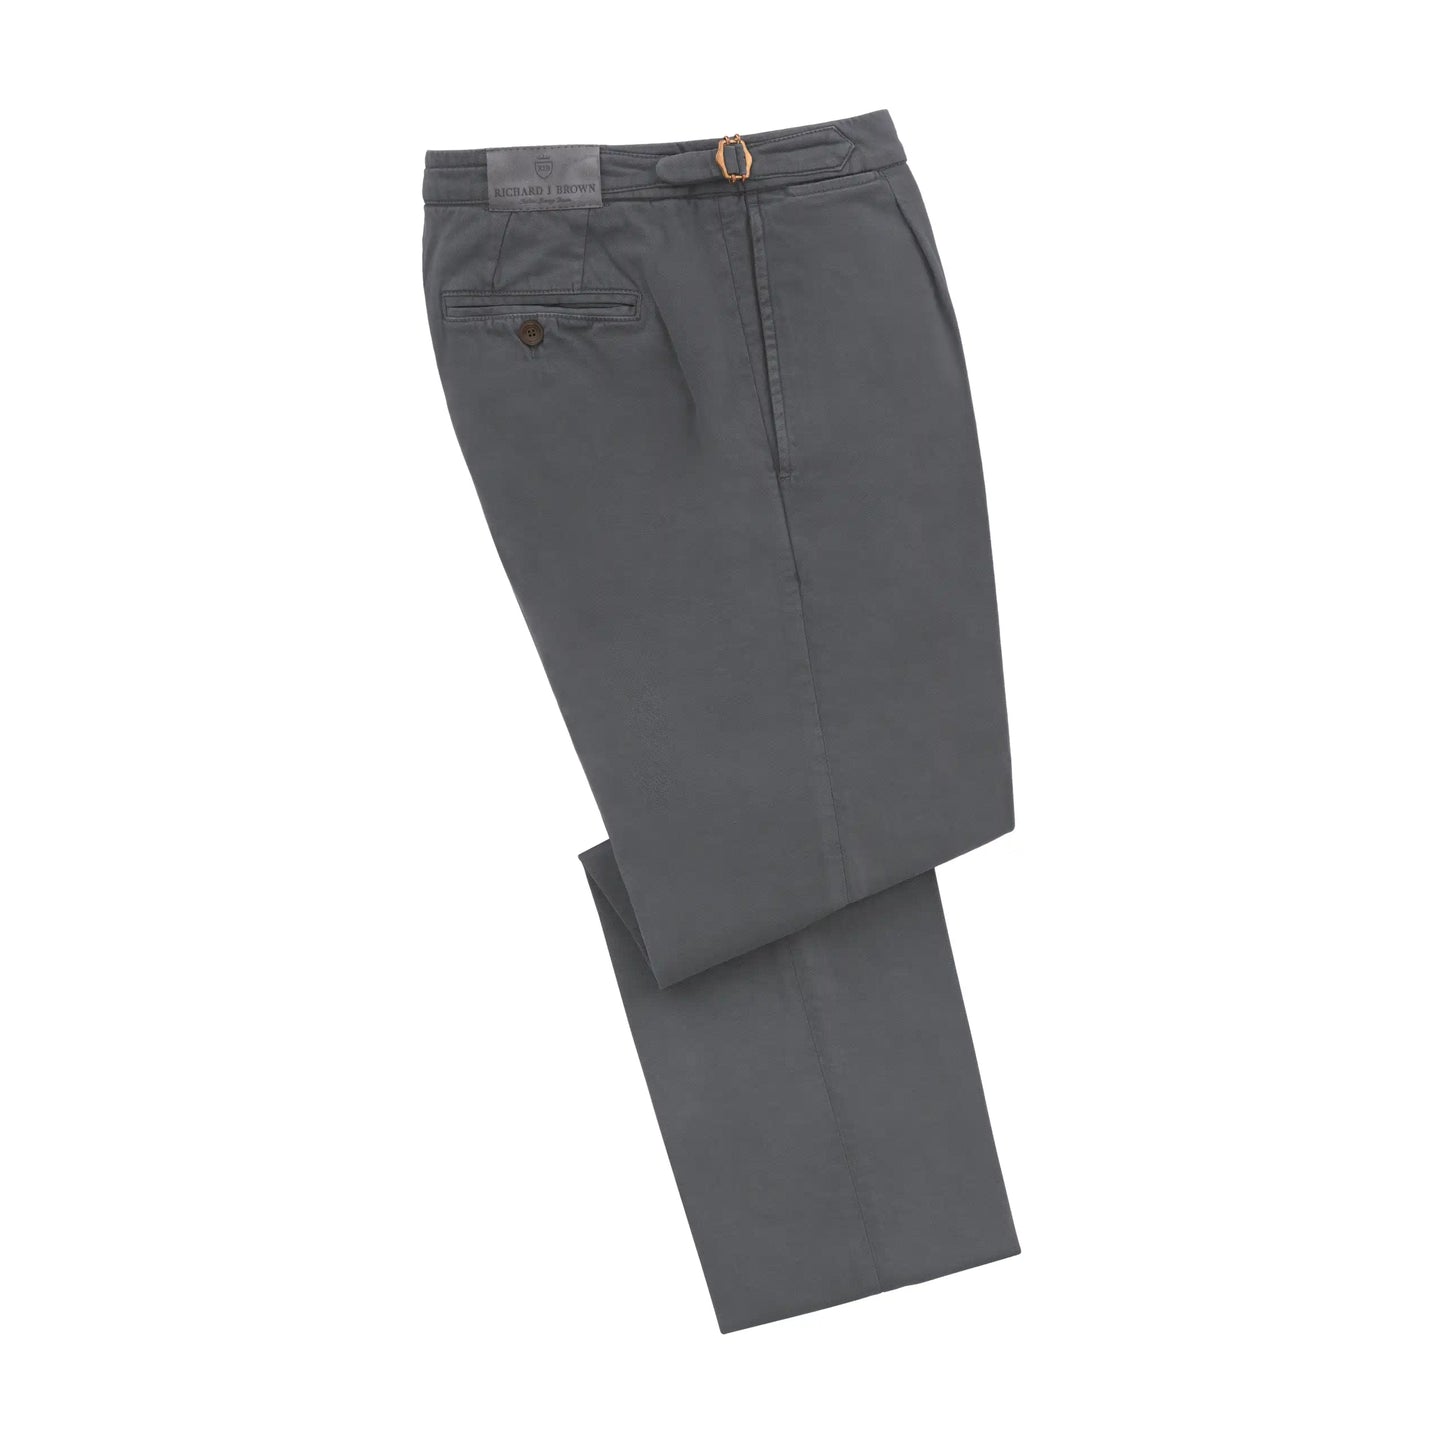 Slim-Fit Cotton-Blend Metallic Grey Trousers with Buckle Adjusters